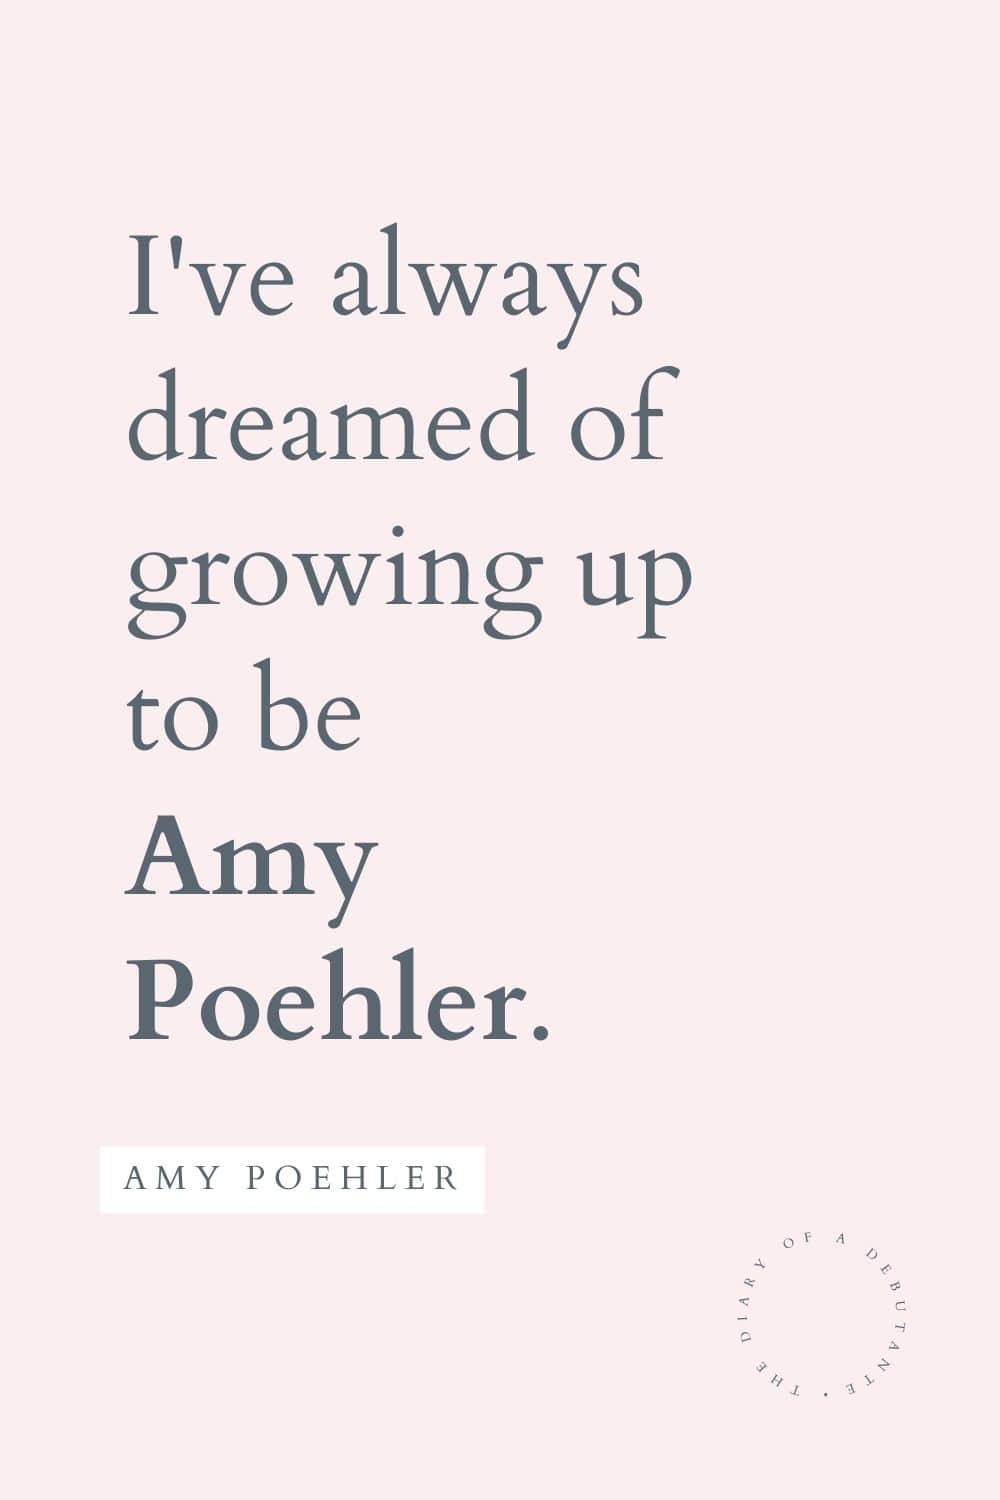 Amy Poehler quote curated as part of a collection of inspirational quotes for encouragement for women by blogger Stephanie Ziajka on Diary of a Debutante